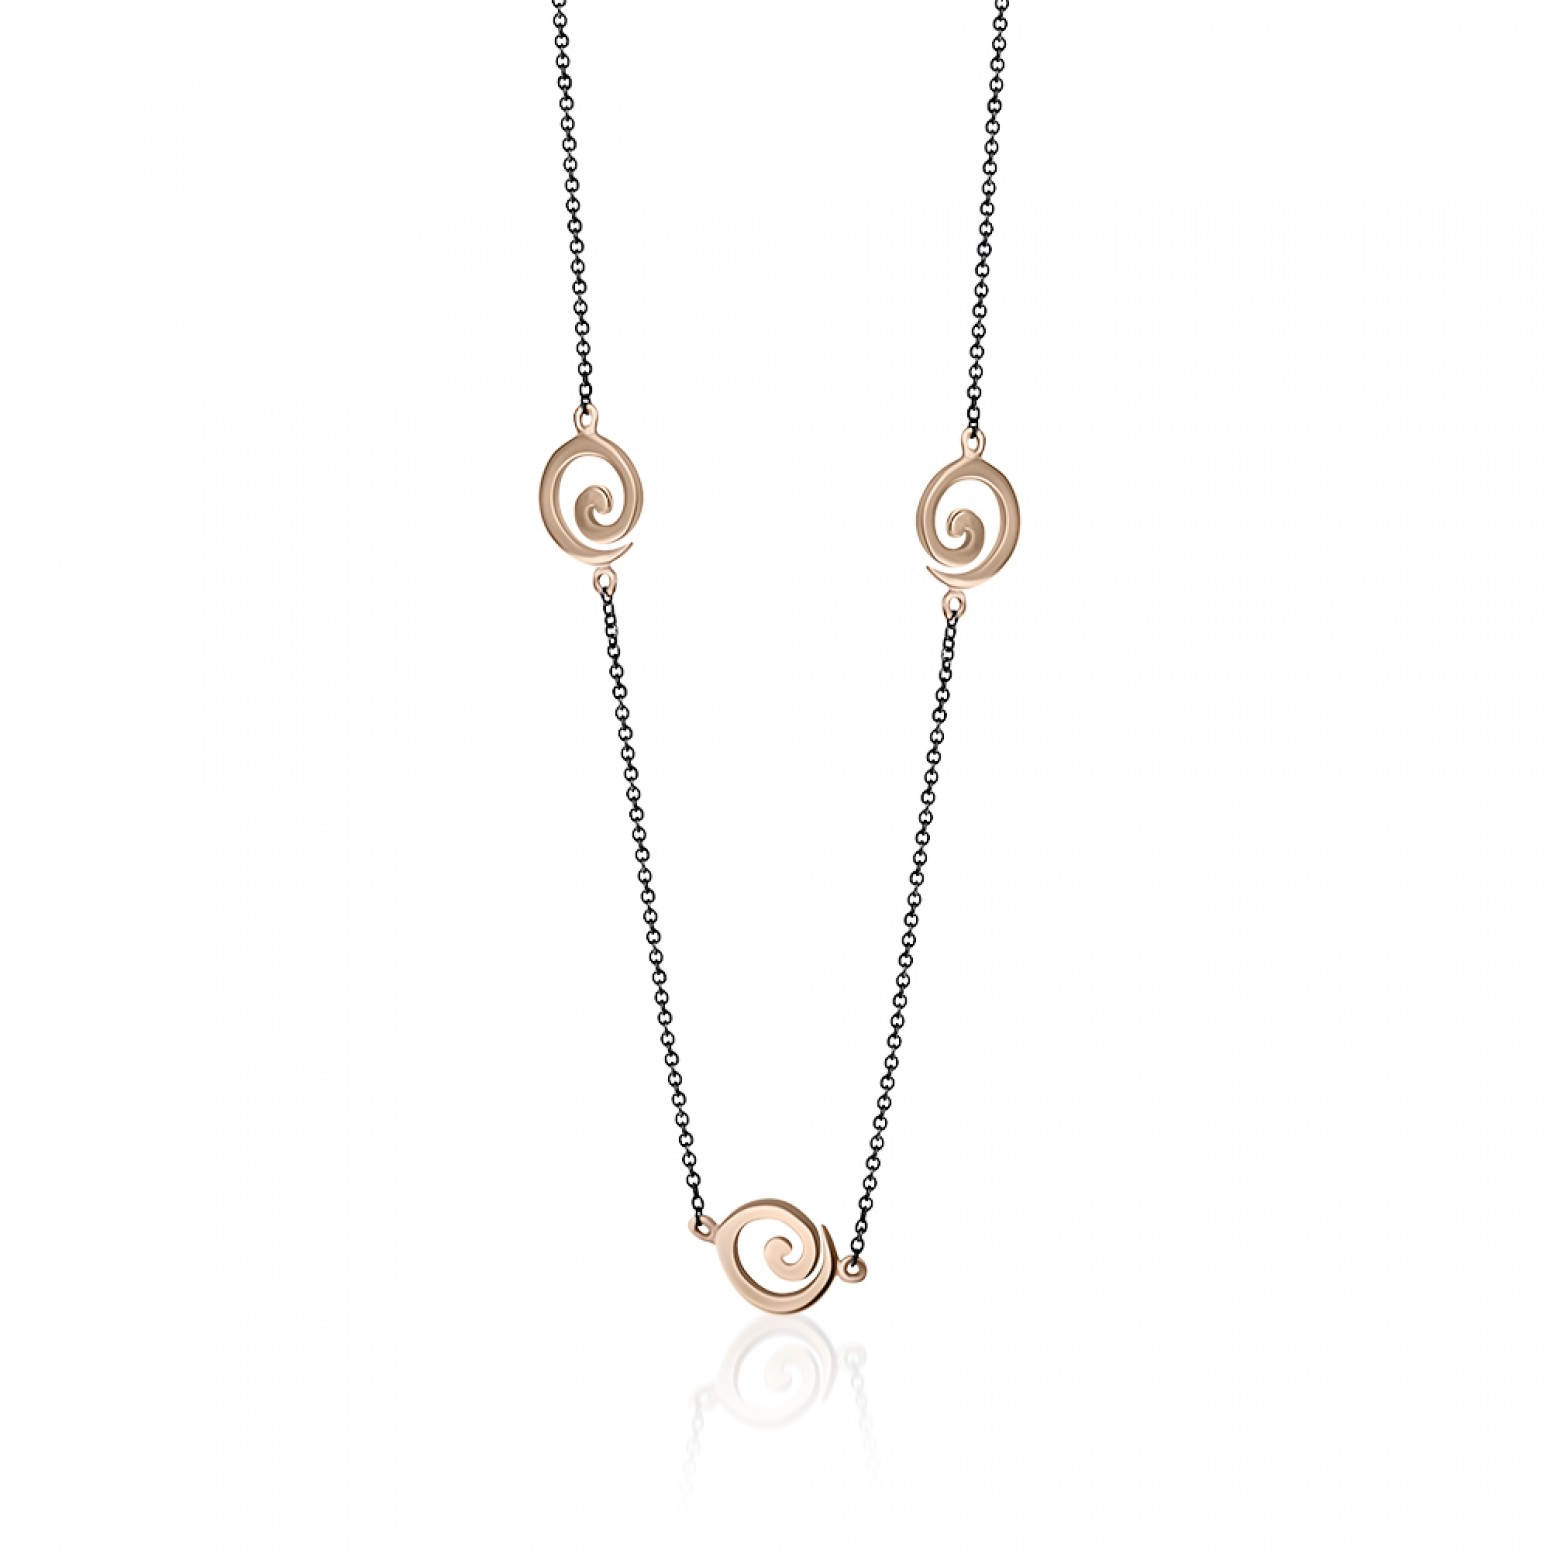 Spiral necklace, Κ9 pink gold and black rhodium plated, ko4410 NECKLACES Κοσμηματα - chrilia.gr